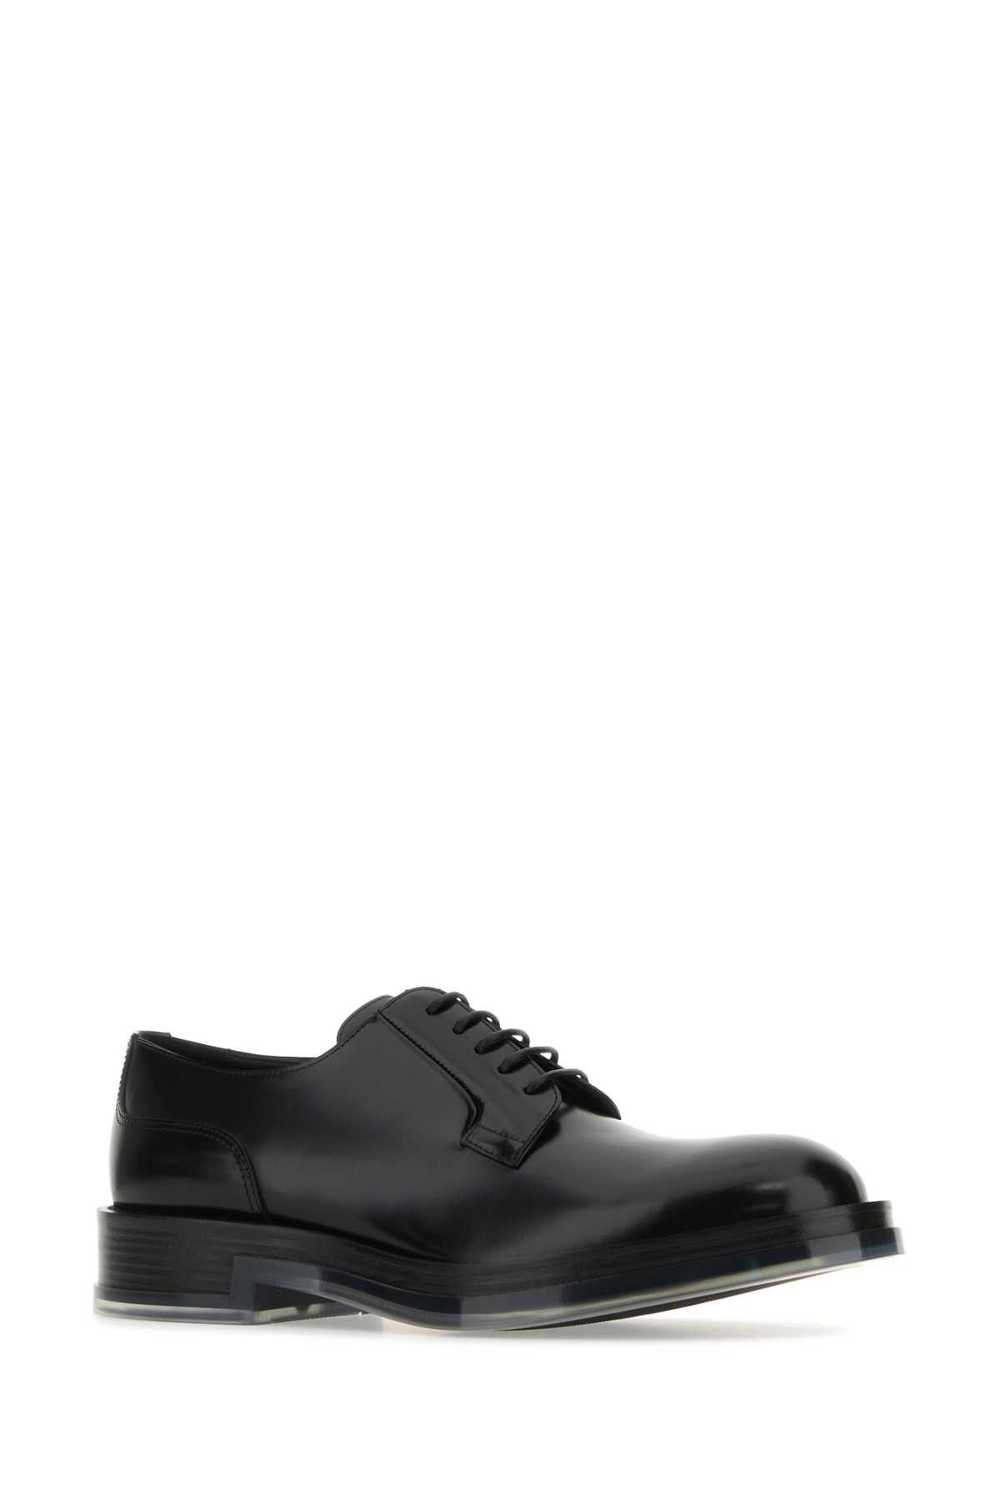 Alexander McQueen Black Leather Float Lace-Up Sho… - image 2